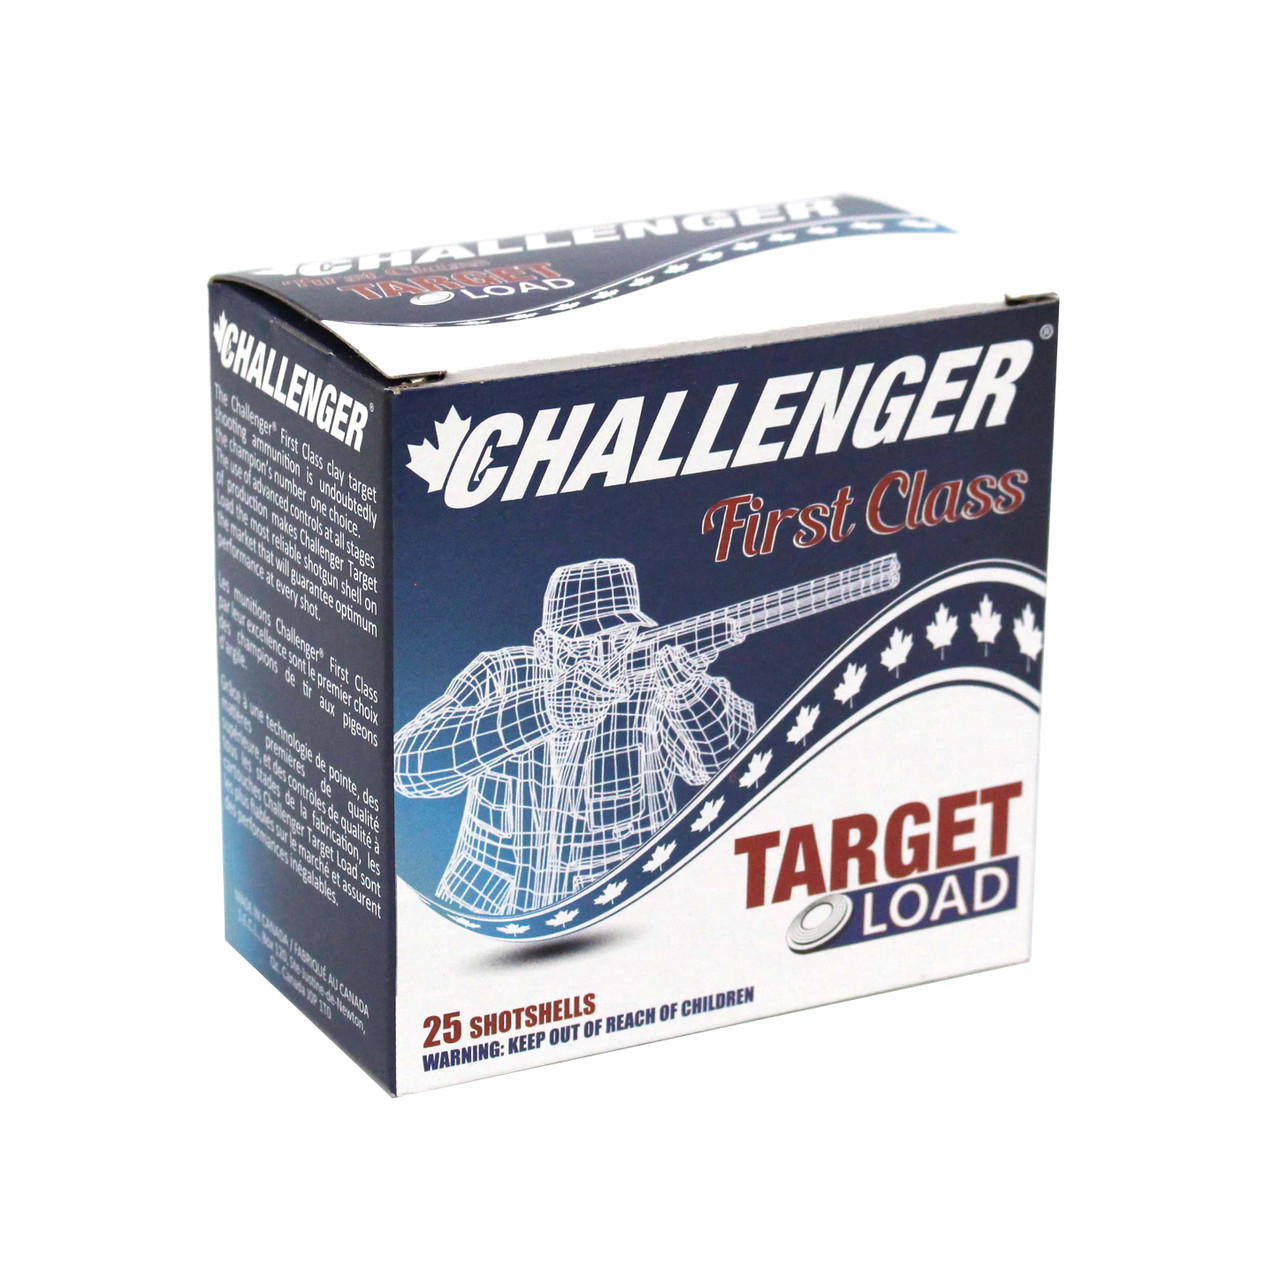 12 GA TARGET INTERNATIONAL --- 25 rds
[THE CHALLENGER® 12 GA INTERNATIONAL Provide the very best in terms of patterns, performance and quality with smooth recoil .]